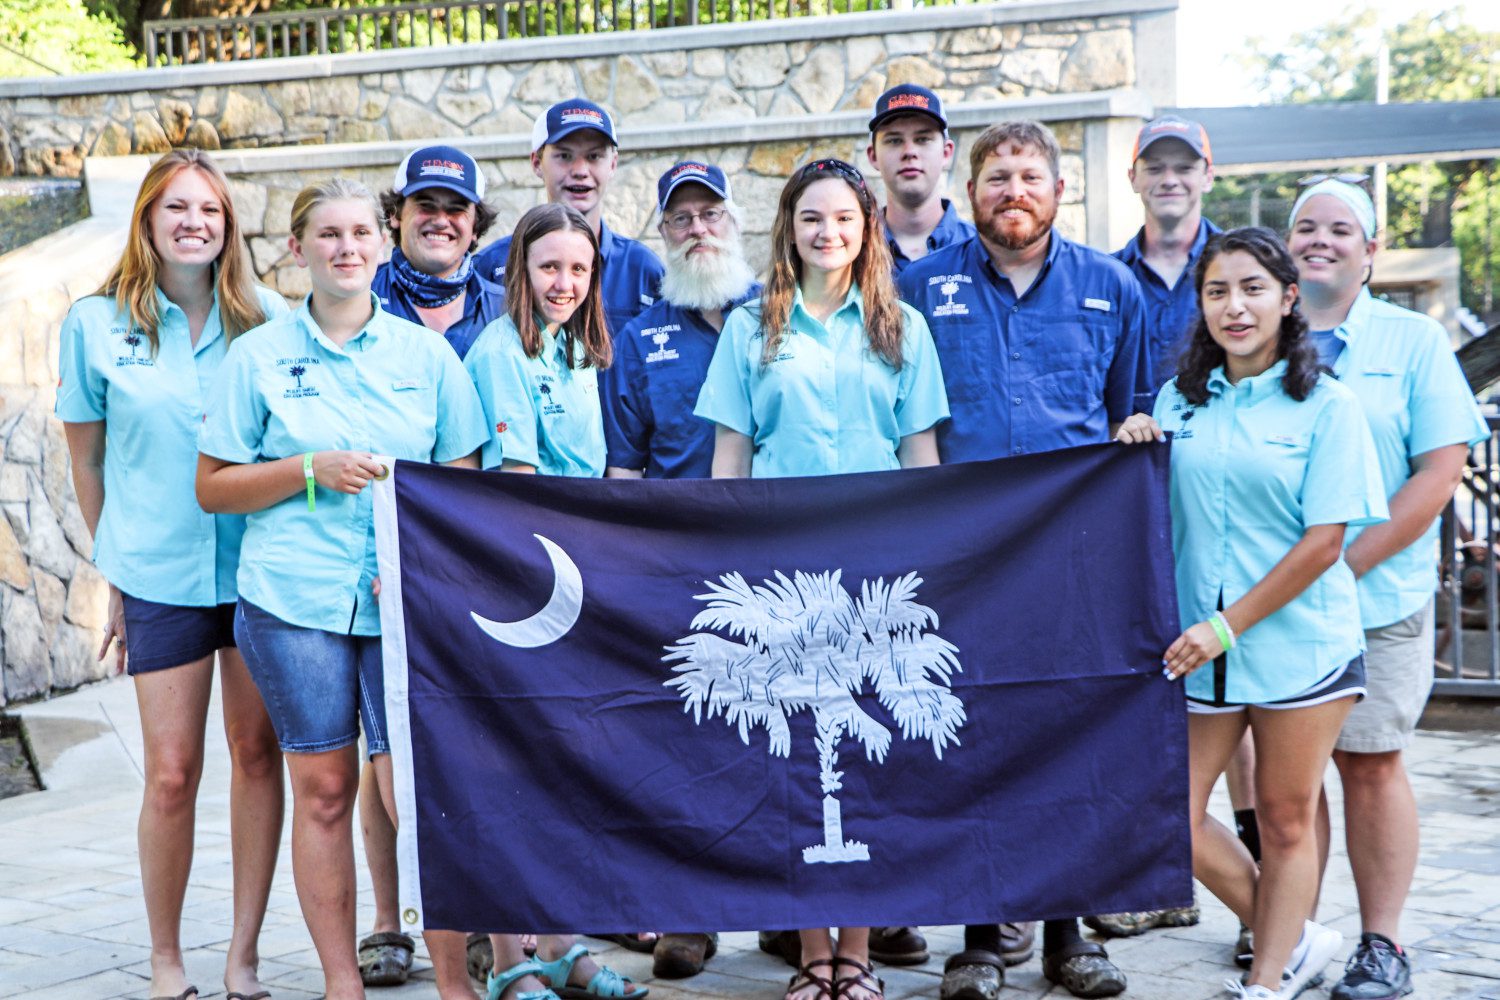 4-H and FFA teams pose together with South Carolina state flag at WHEP competition.